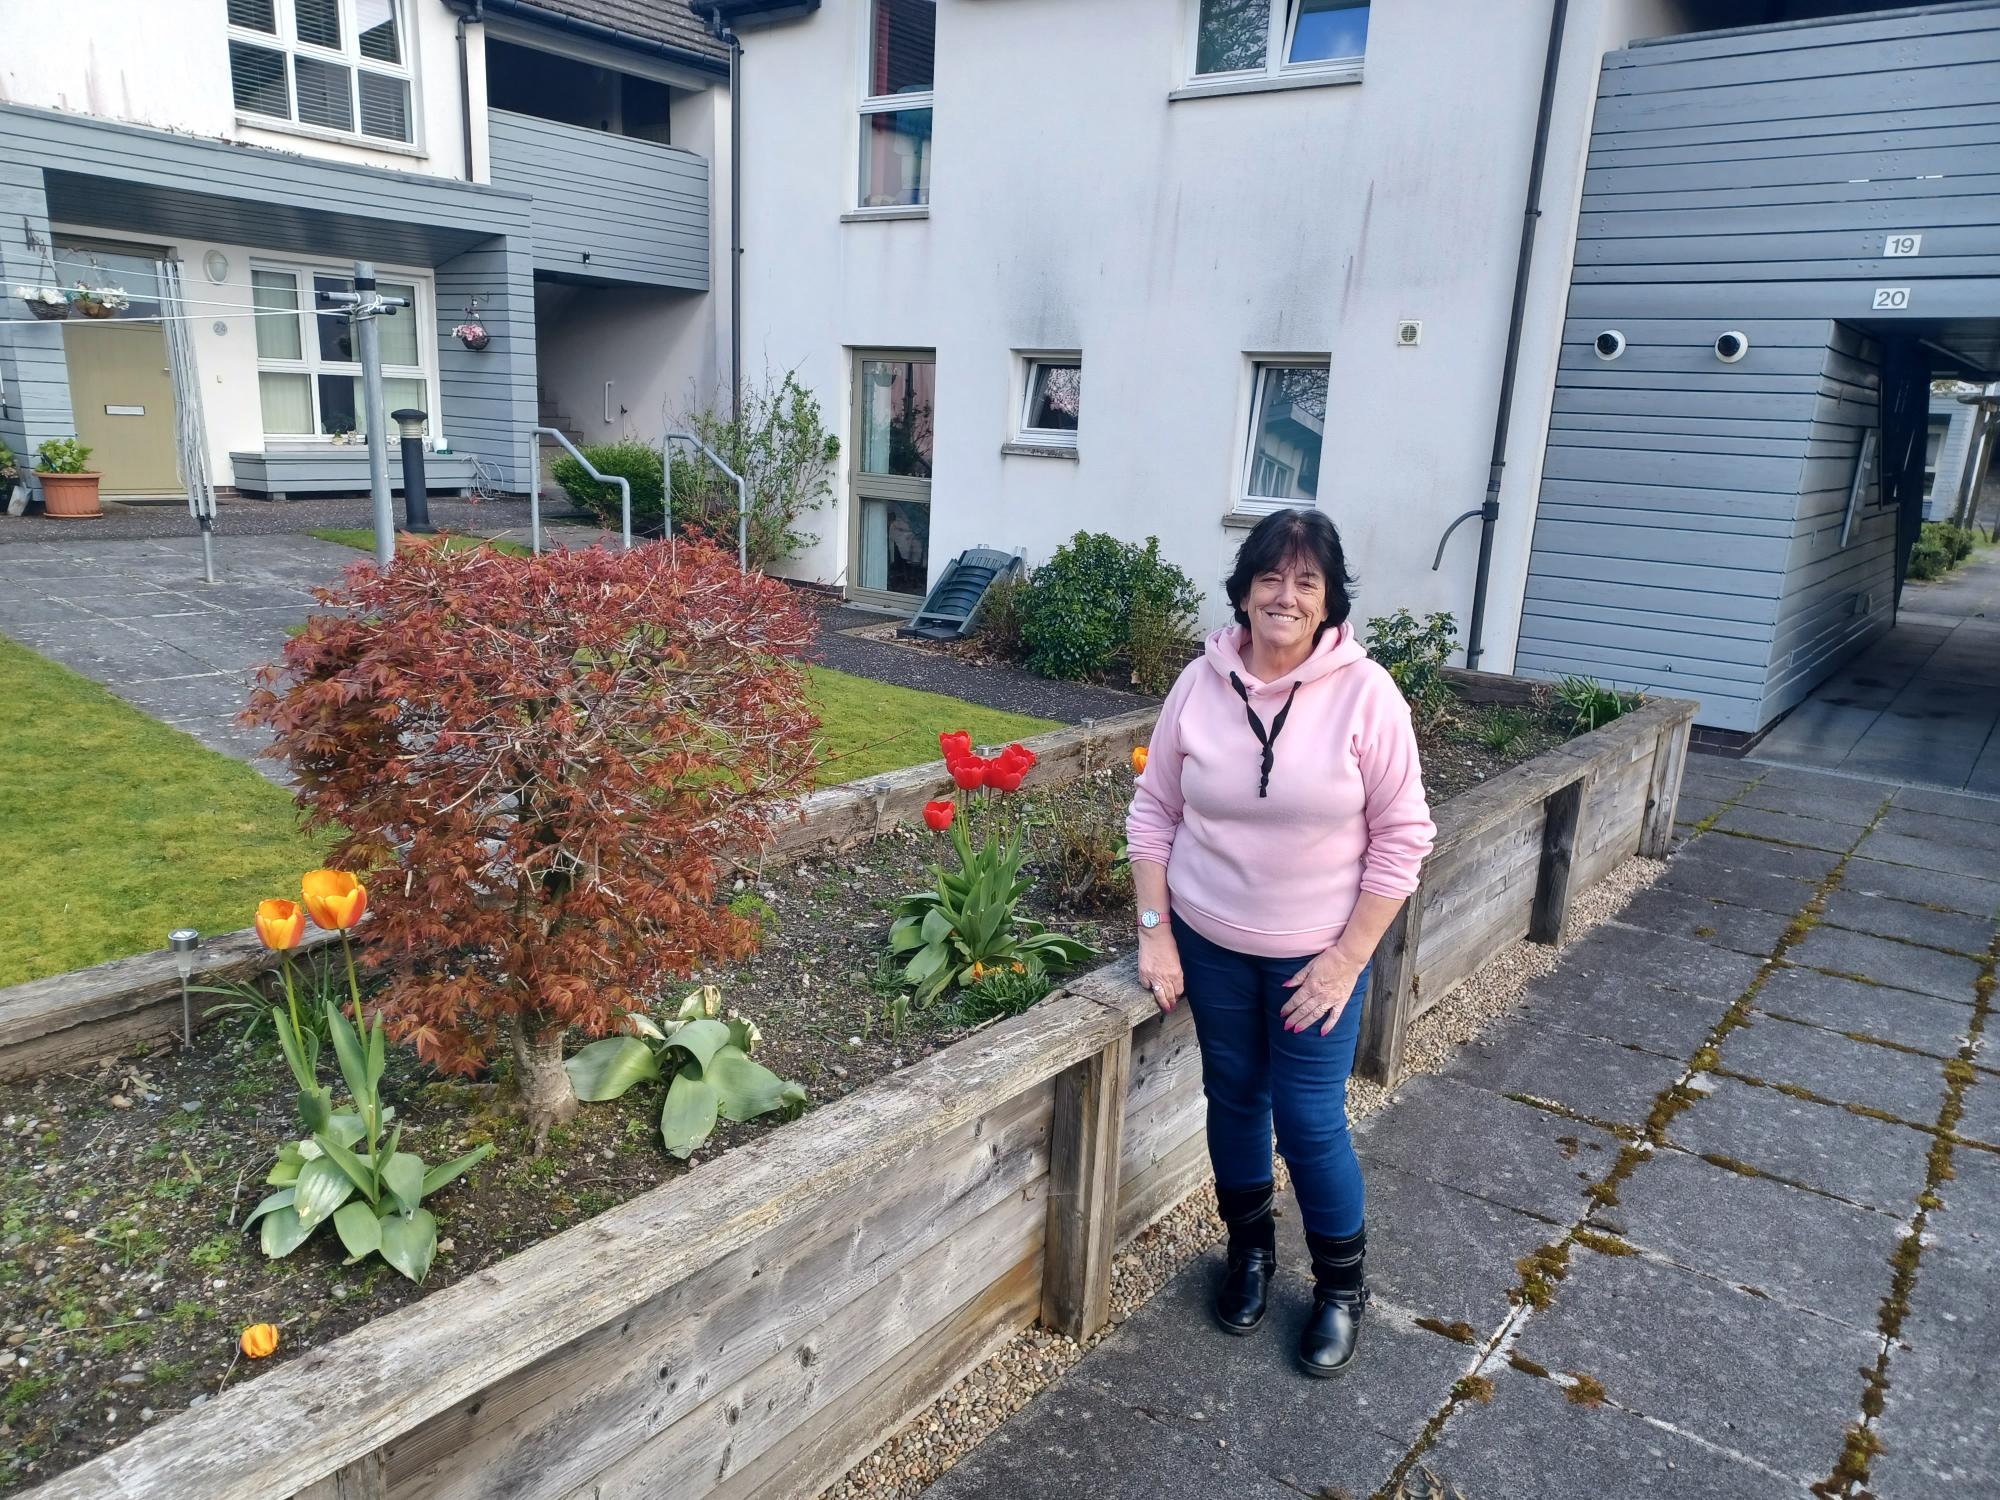 Methlan Park is blooming lovely thanks to Loretto Housing Association